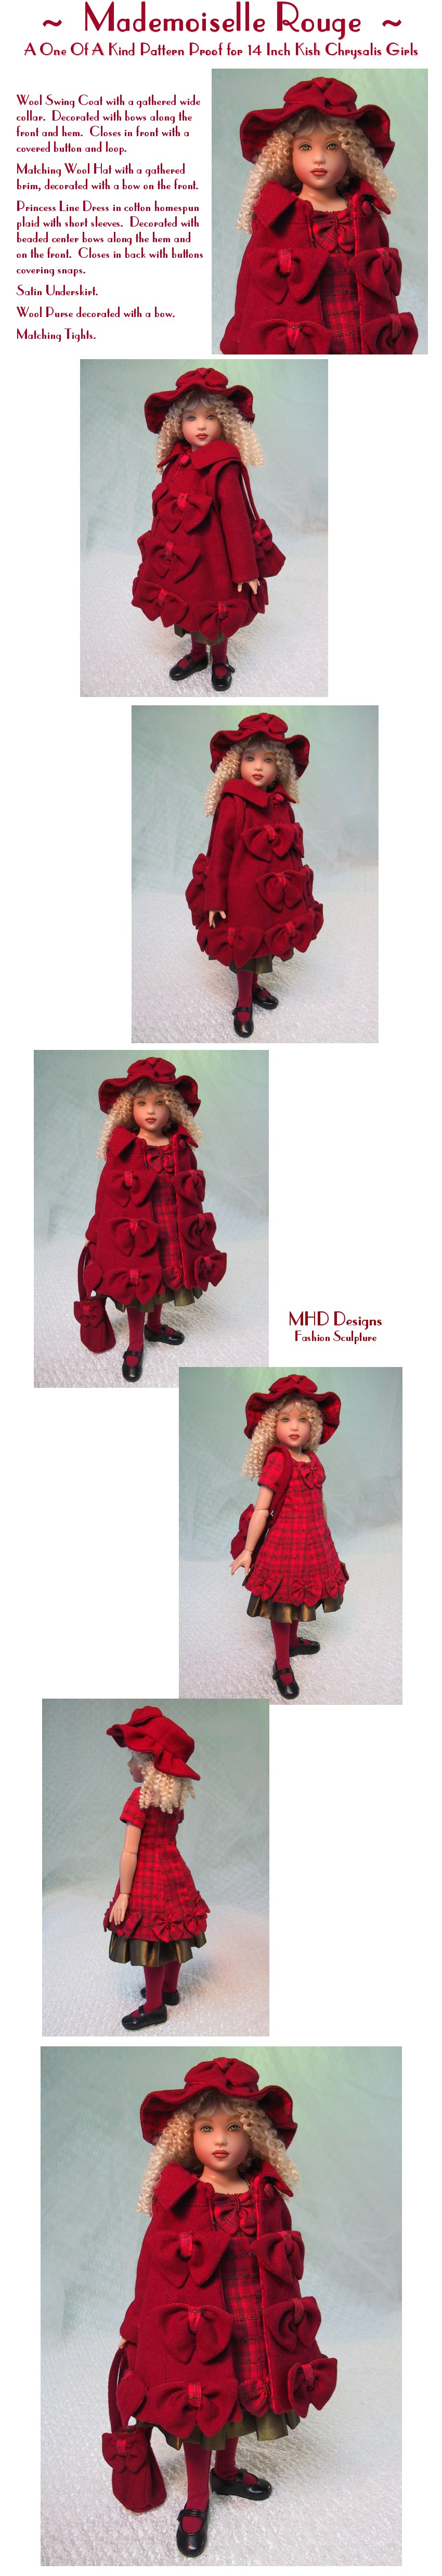 Maiden In Red - a One Of A Kind Pattern Proof by MHD Designs - High Resolution Photographs, your patience is appreciated!